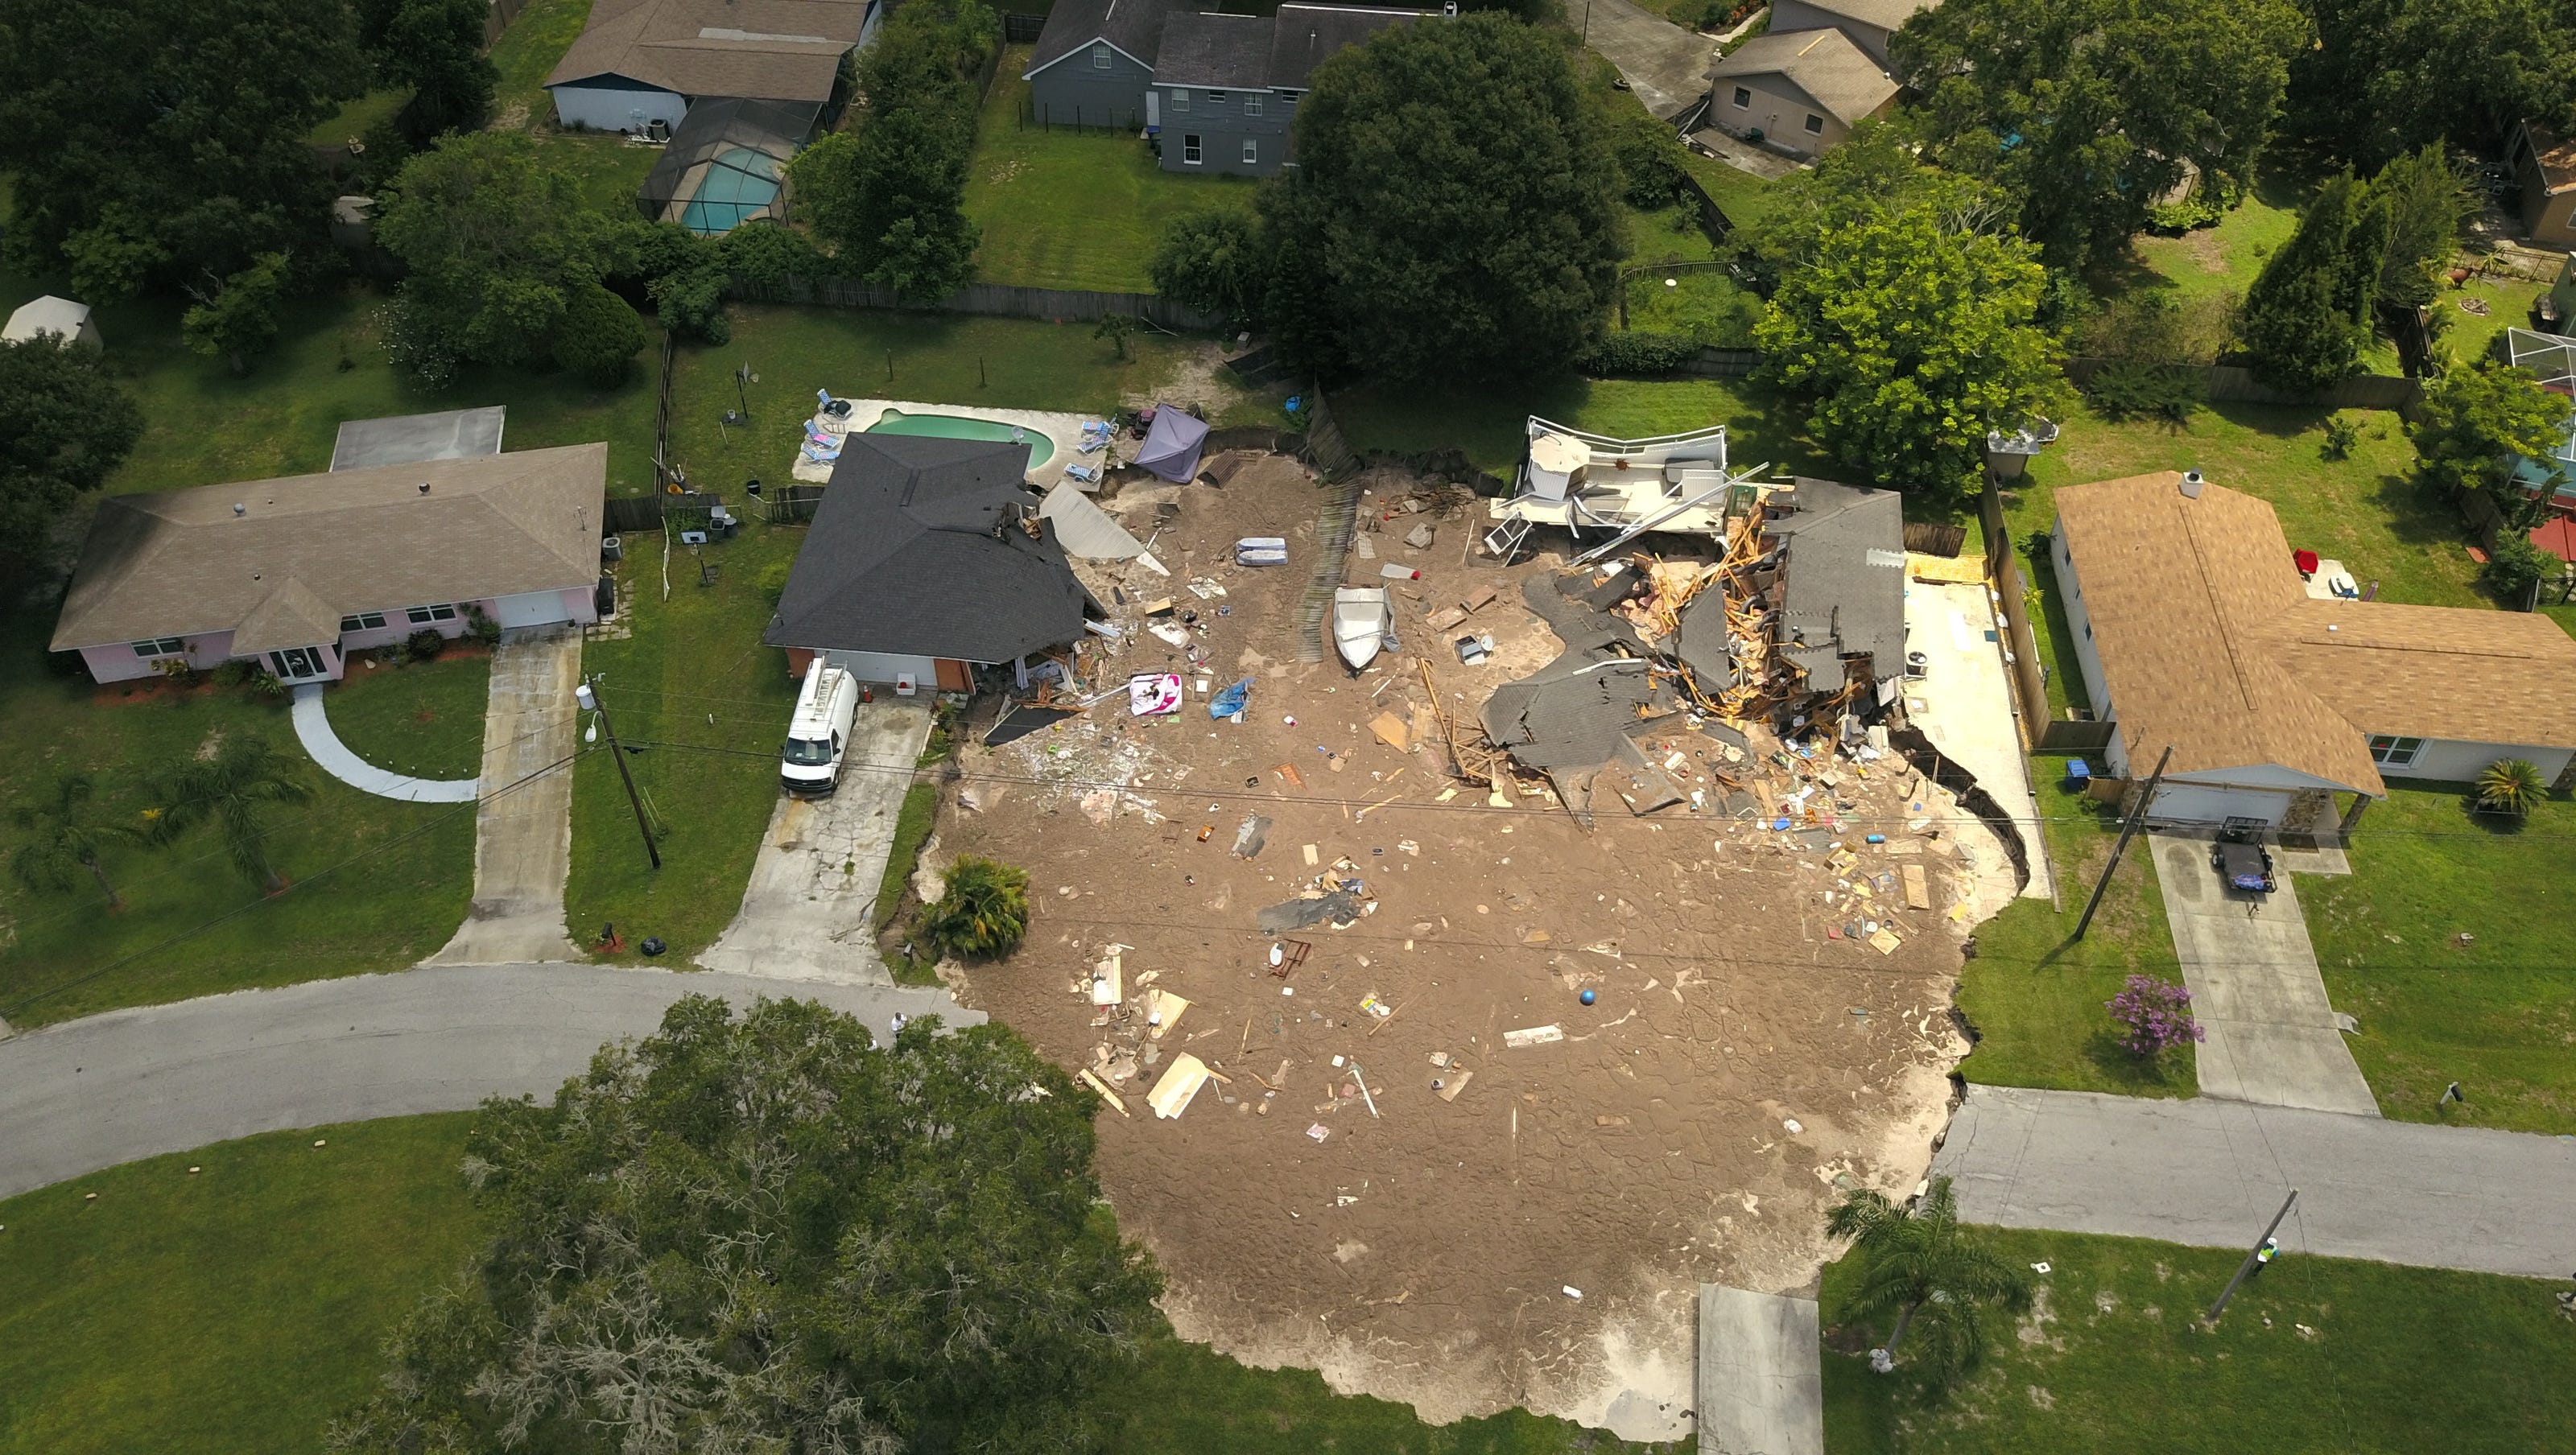 Officials don't know when Florida sinkhole will stop growing